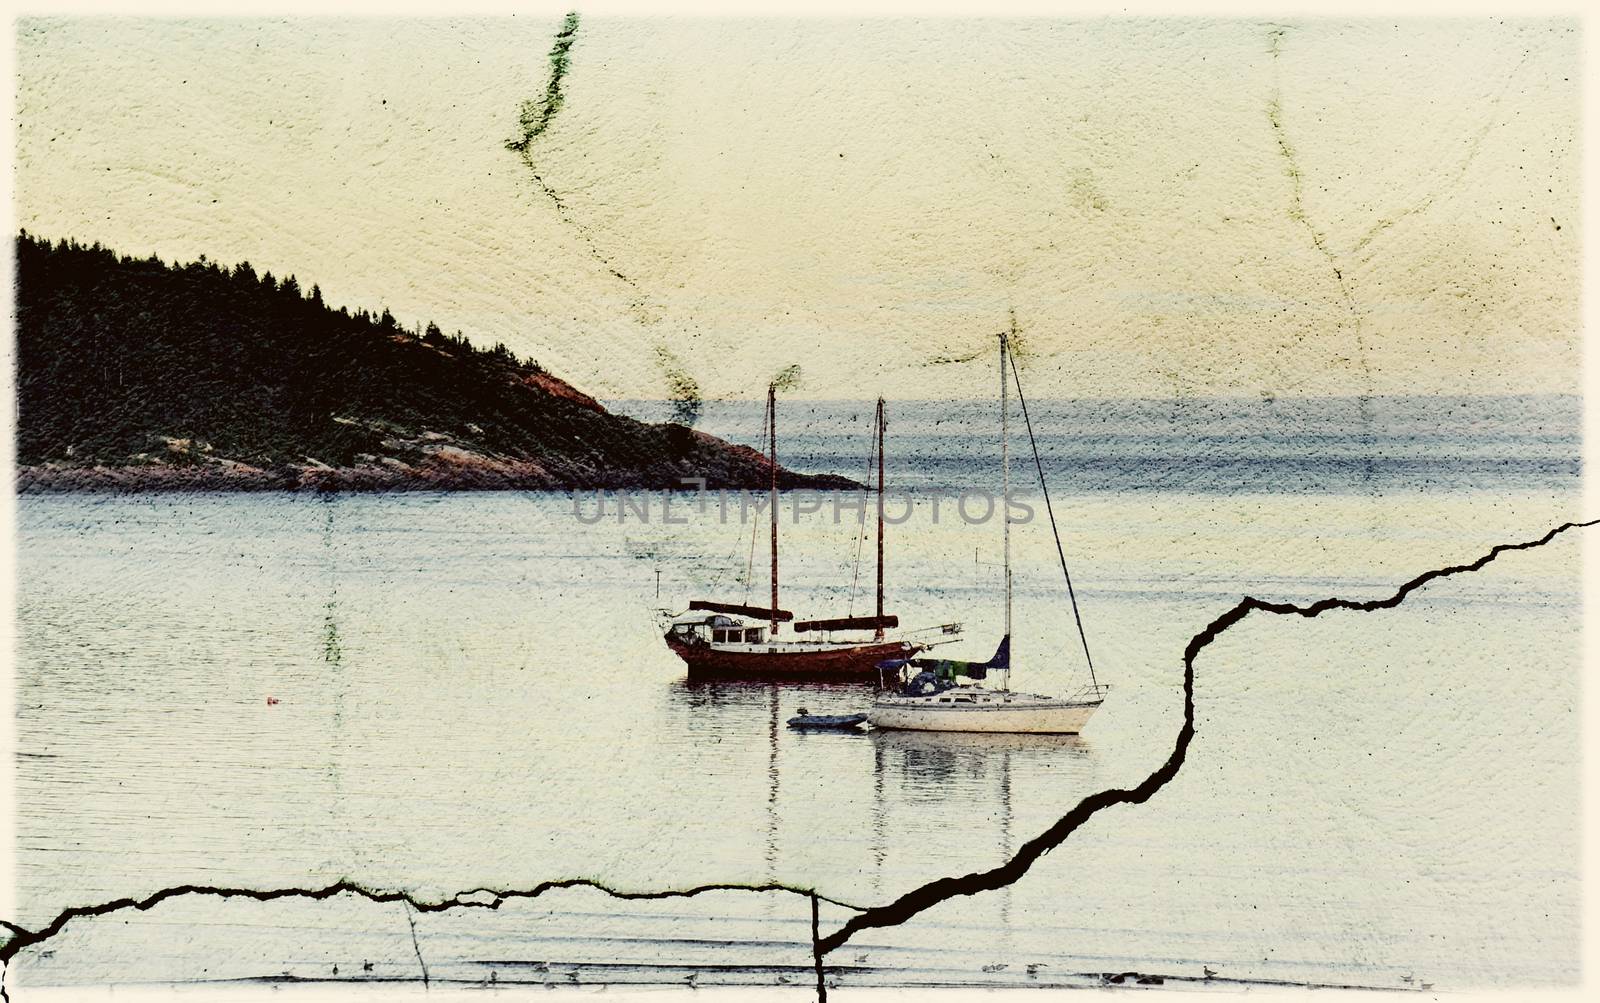 Old vintage effects on photo of sailboats, noise added